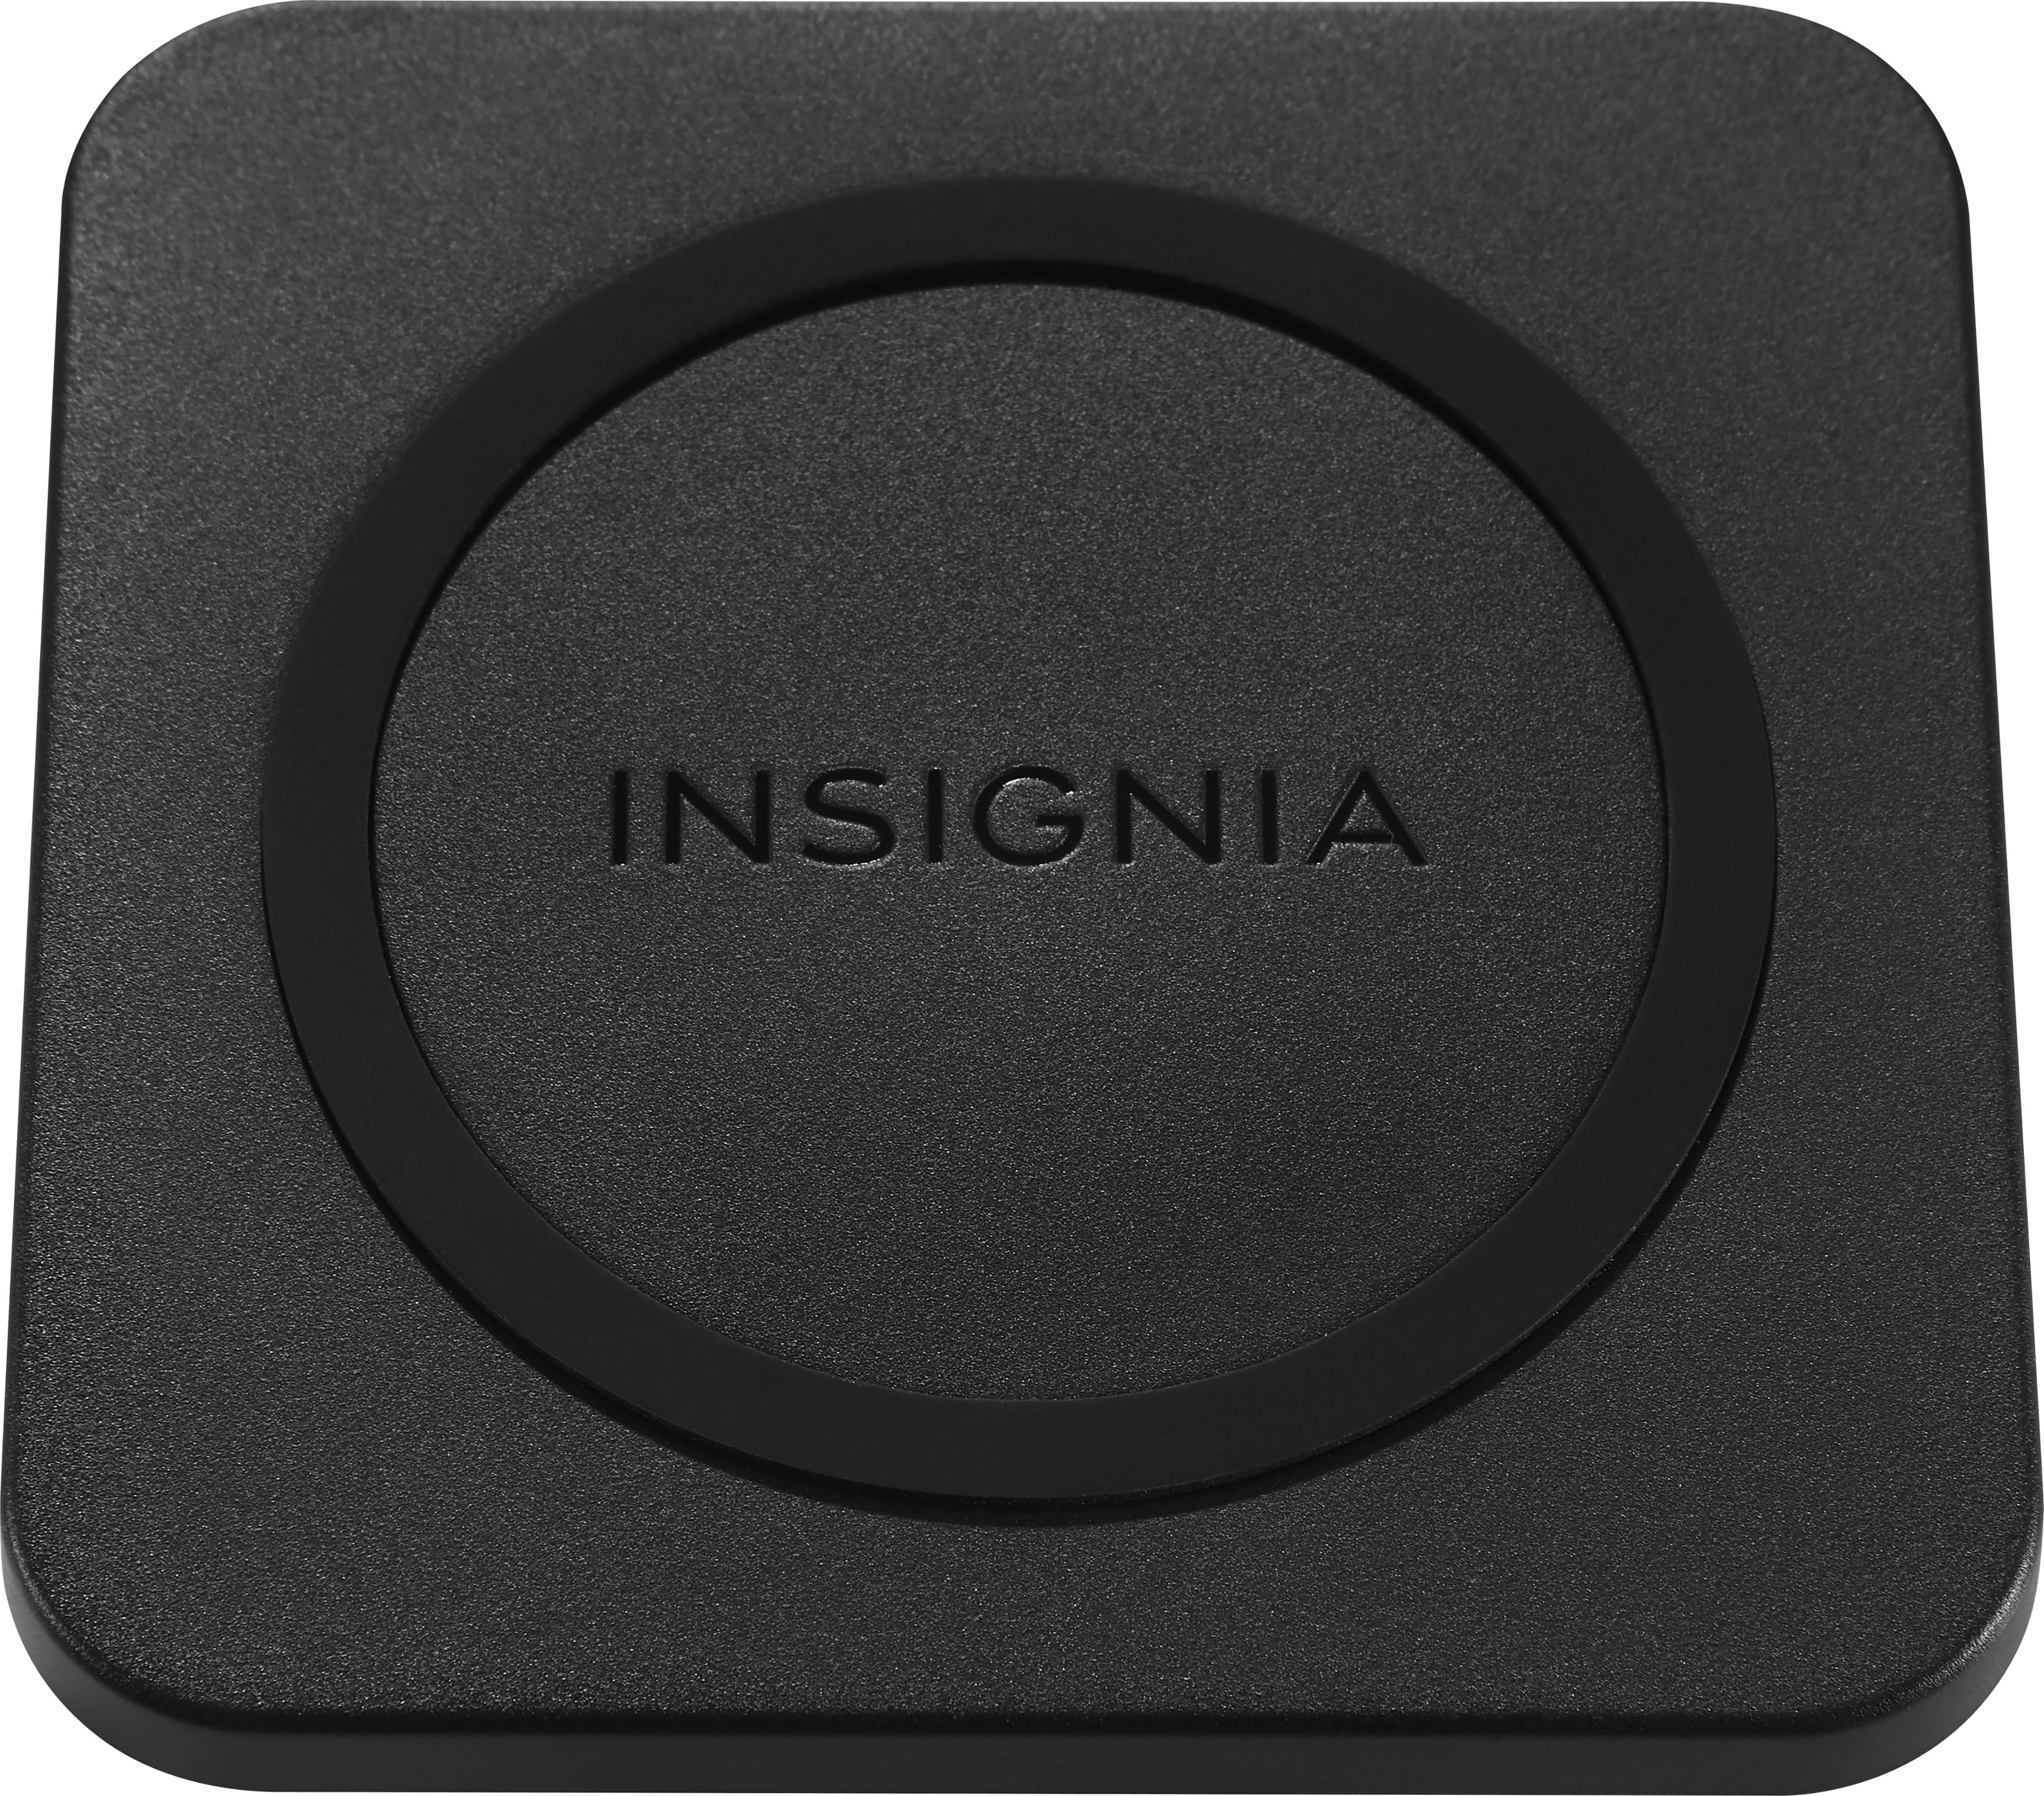 Insignia™ - 5 W Qi Certified Wireless Charging Pad for Android/iPhone - Black $3.49 or $2.99 Open Box FS at Best Buy